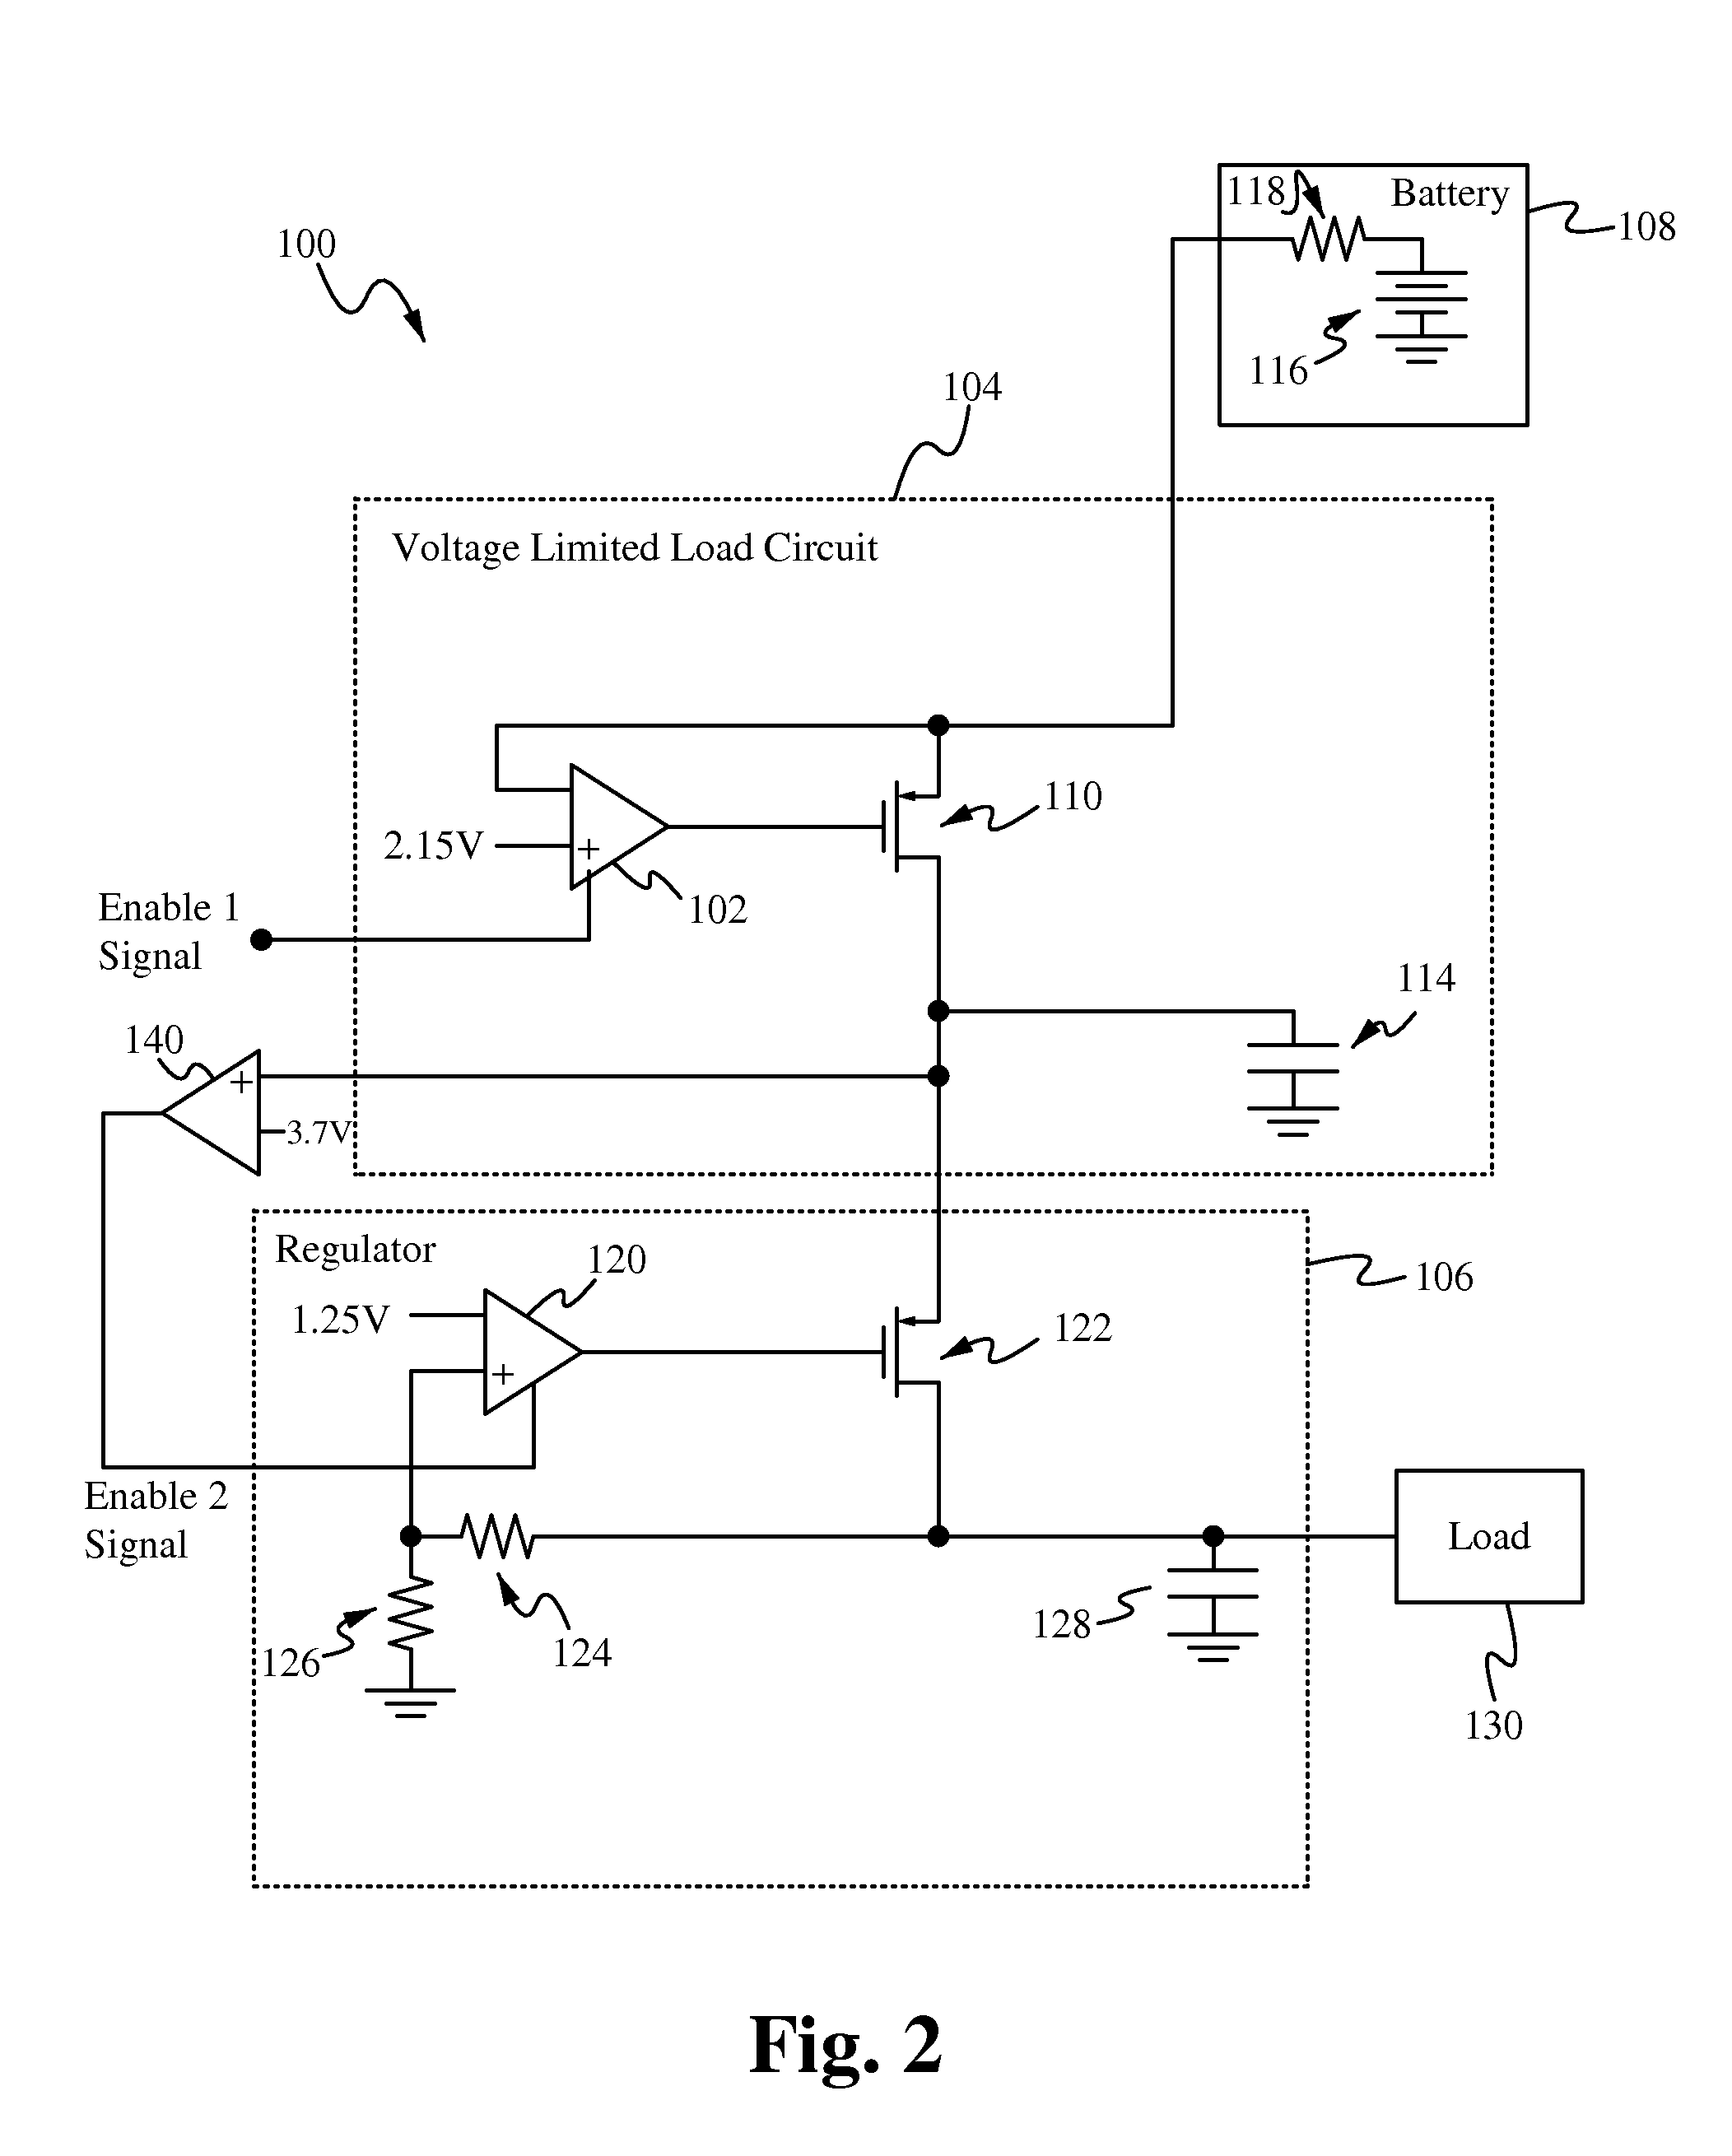 Circuit topology for regulating power from low capacity battery cells